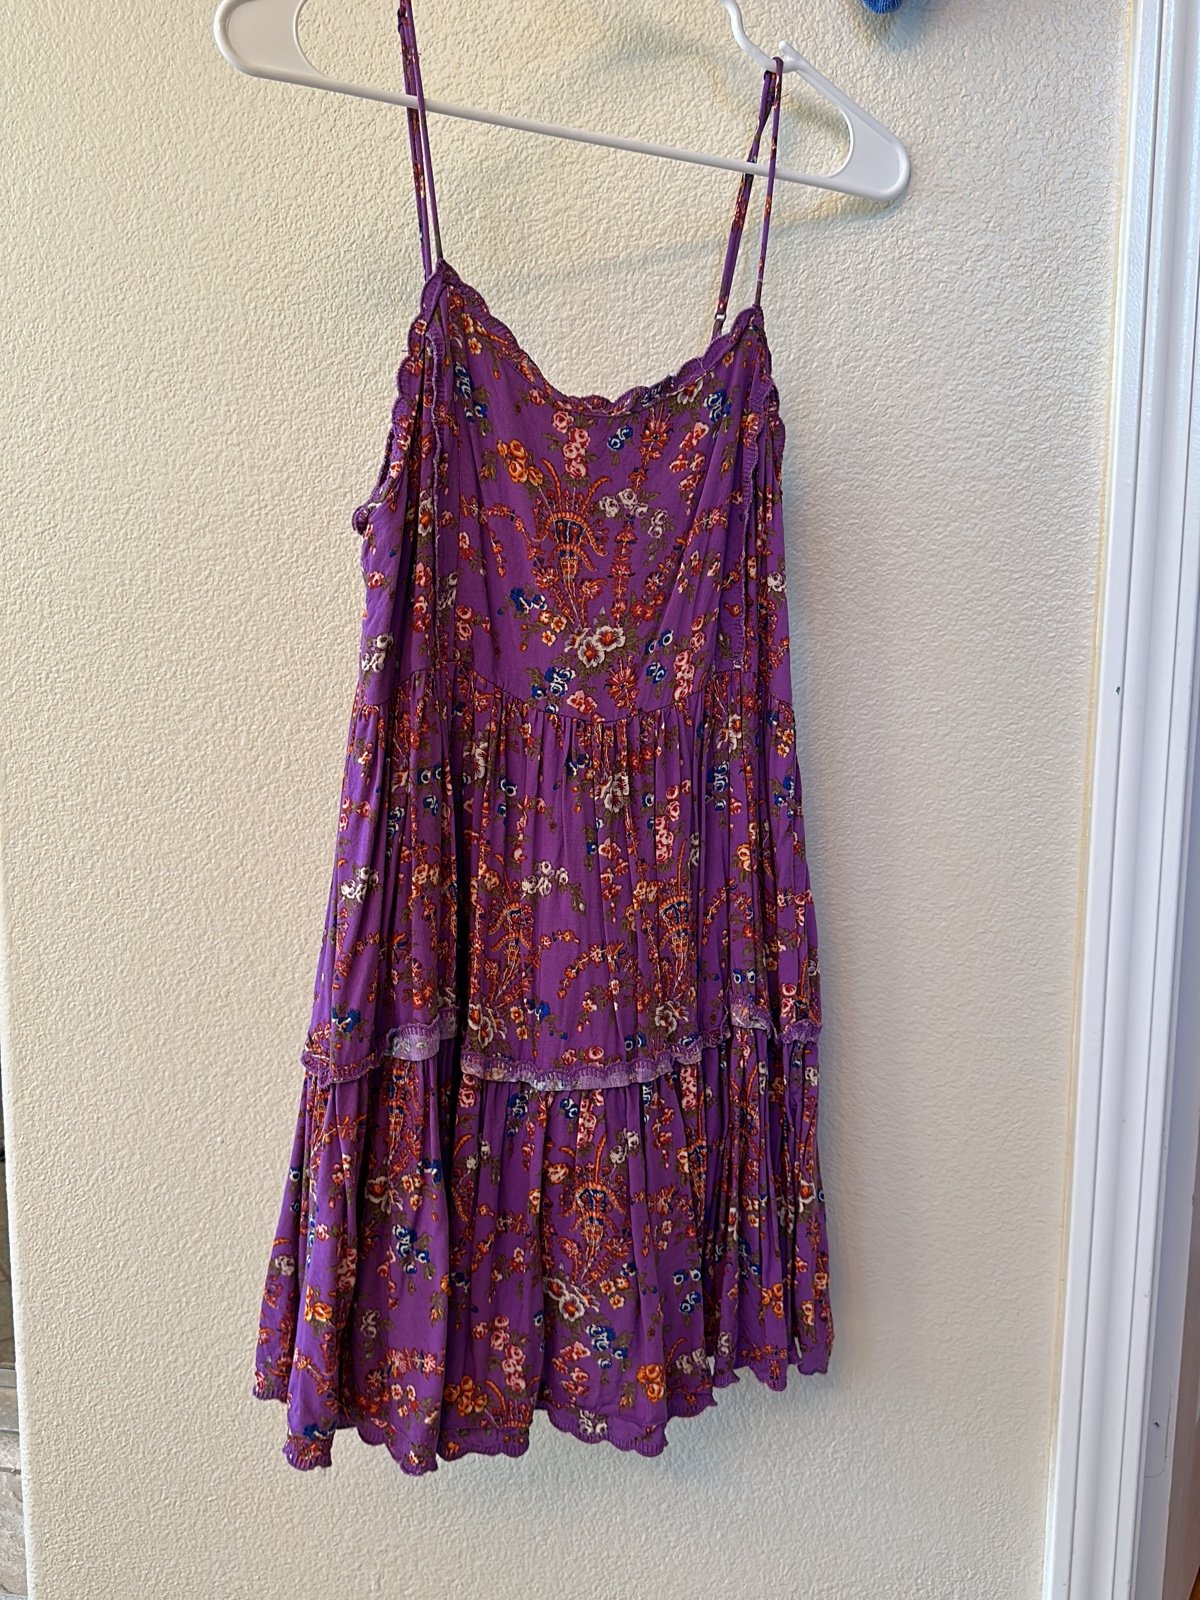 reasonable price Urban Outfitters dress lbzGSvDrS US Ou